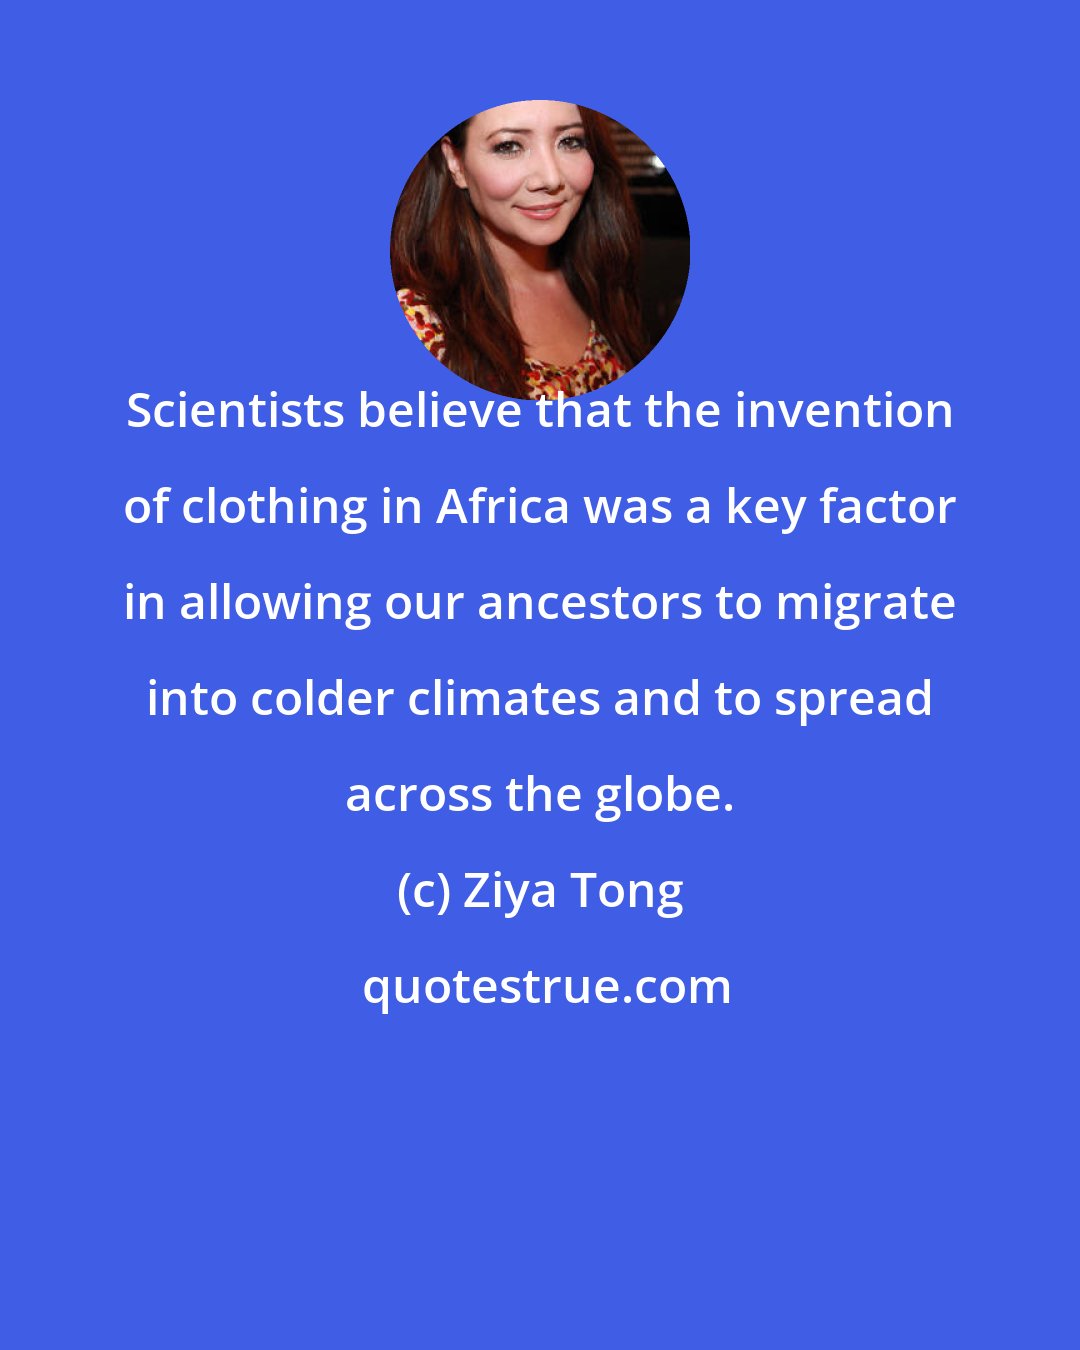 Ziya Tong: Scientists believe that the invention of clothing in Africa was a key factor in allowing our ancestors to migrate into colder climates and to spread across the globe.